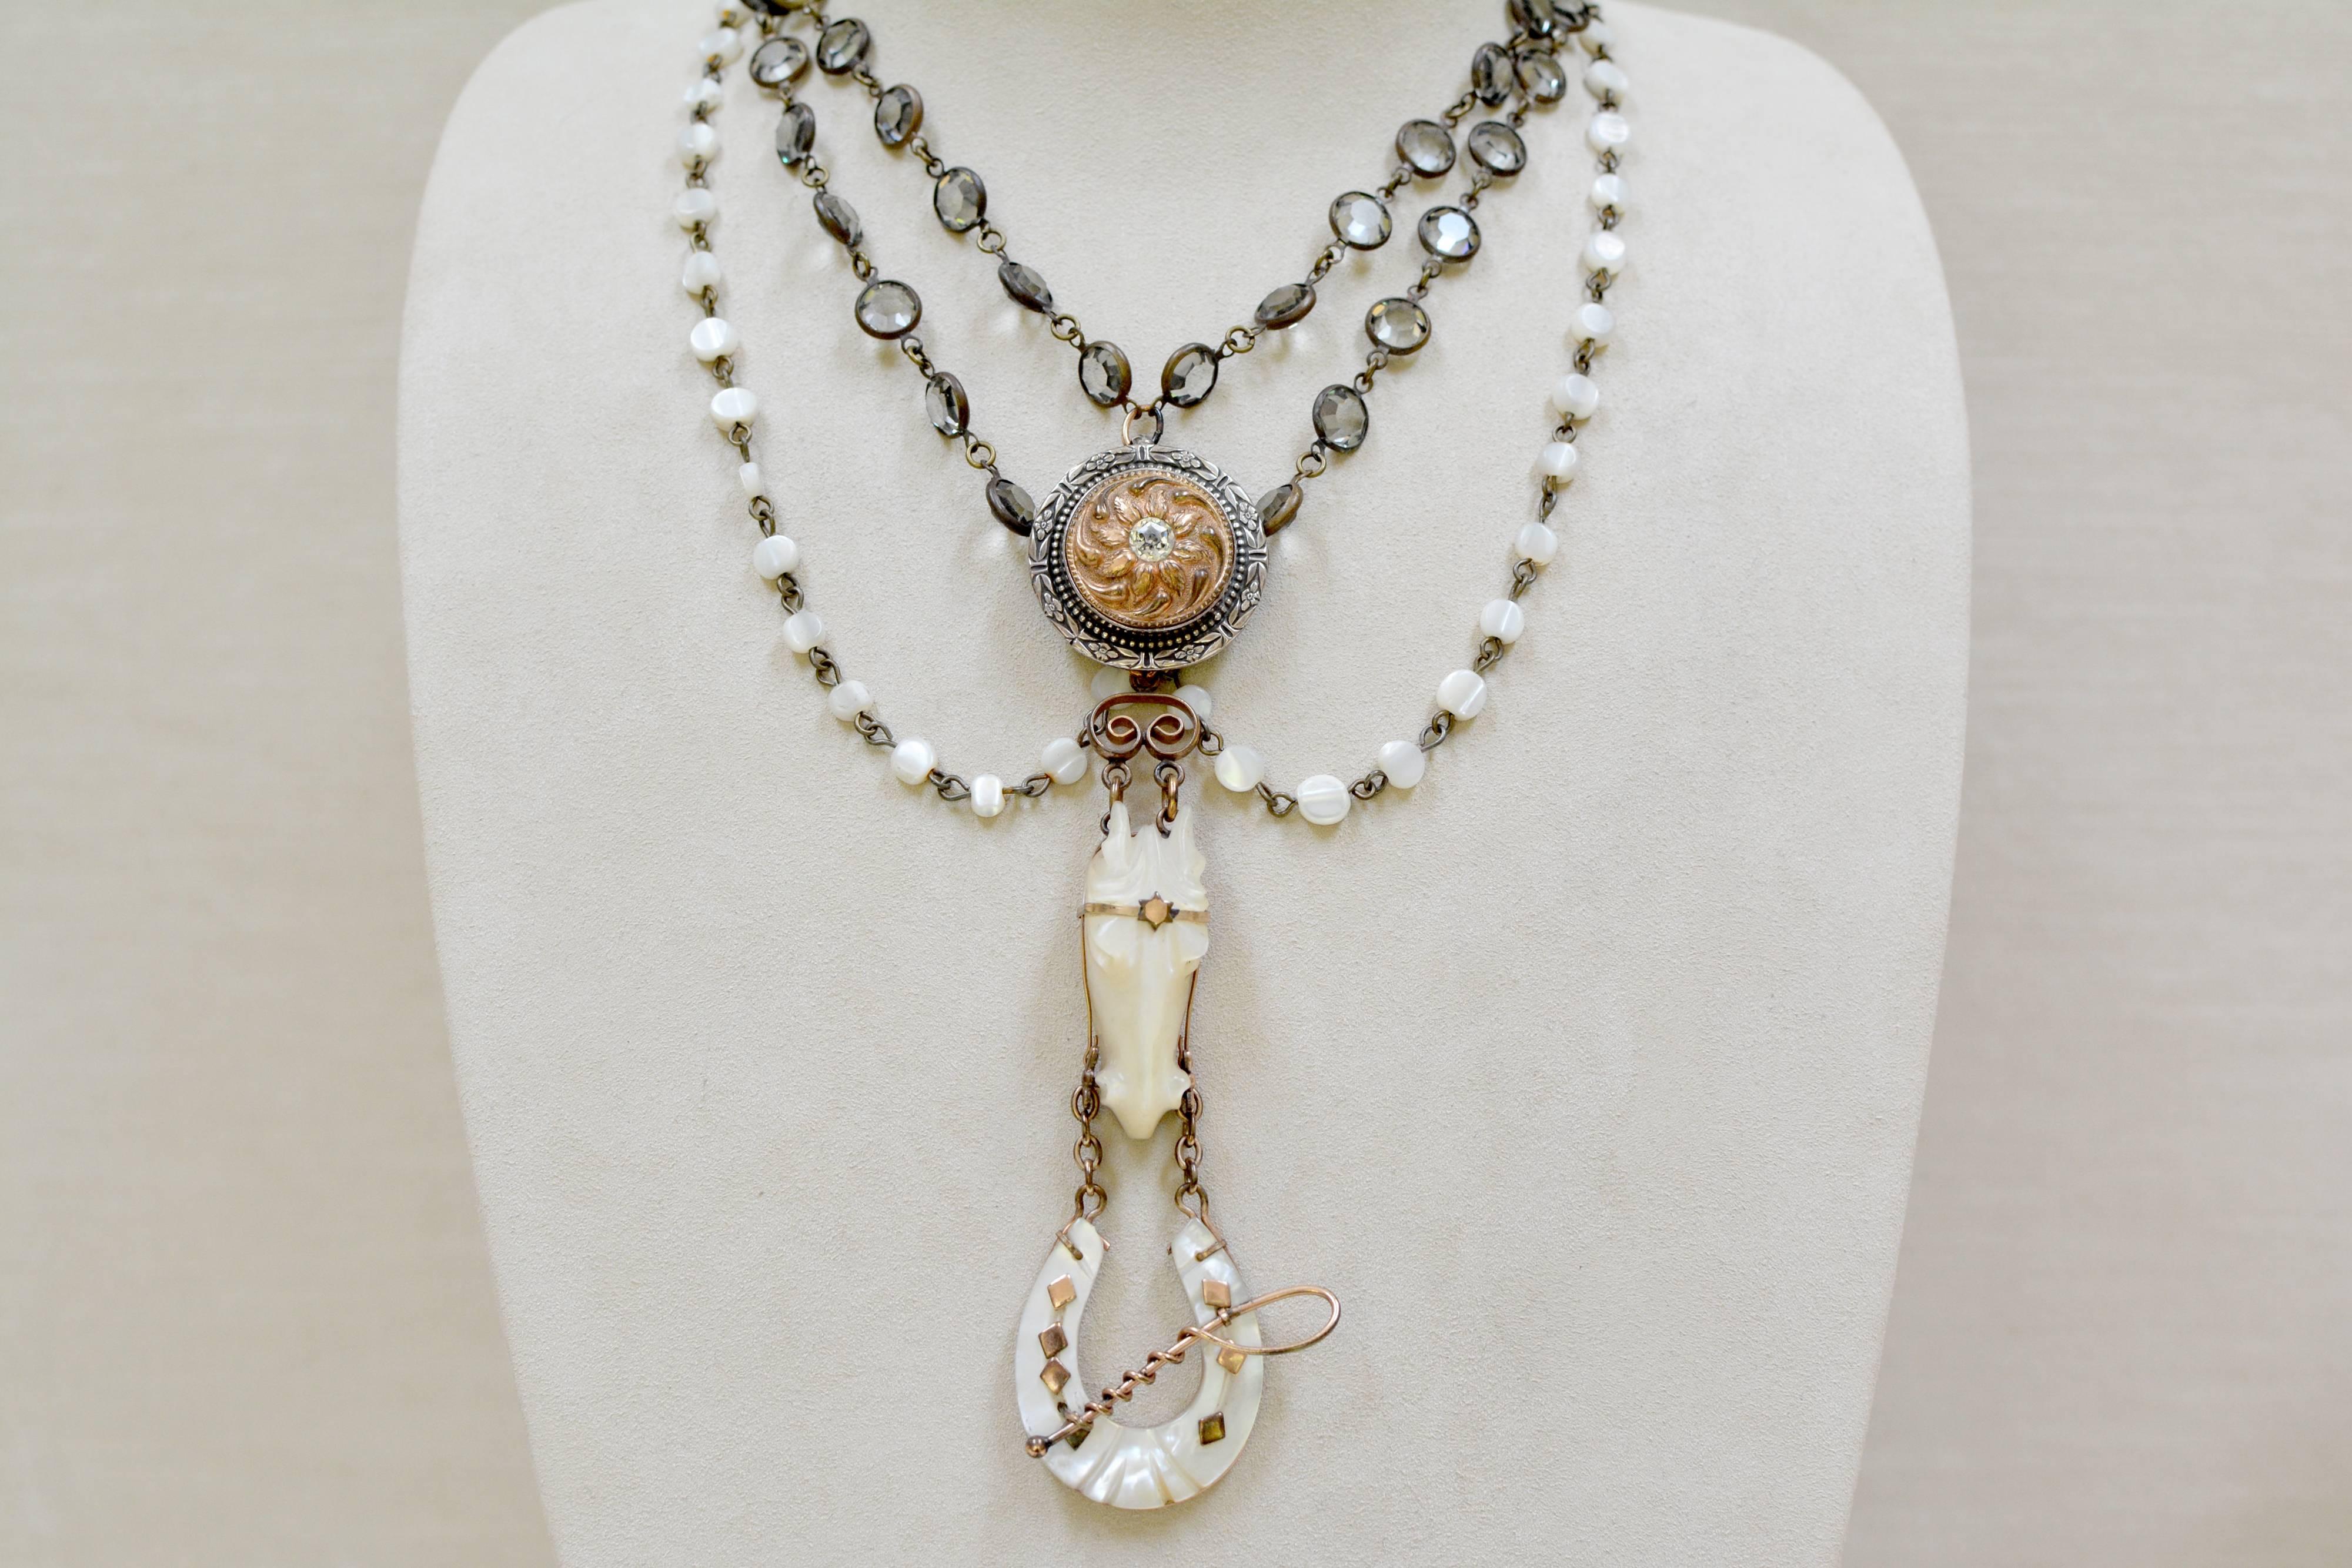 At the center of this one of a kind Love Token Festoon necklace is an antique Victorian Mother-of-Pearl watch fob which was custom made for a Montana rancher around the turn of the century. Rose Gold details highlight the very dimensional carved